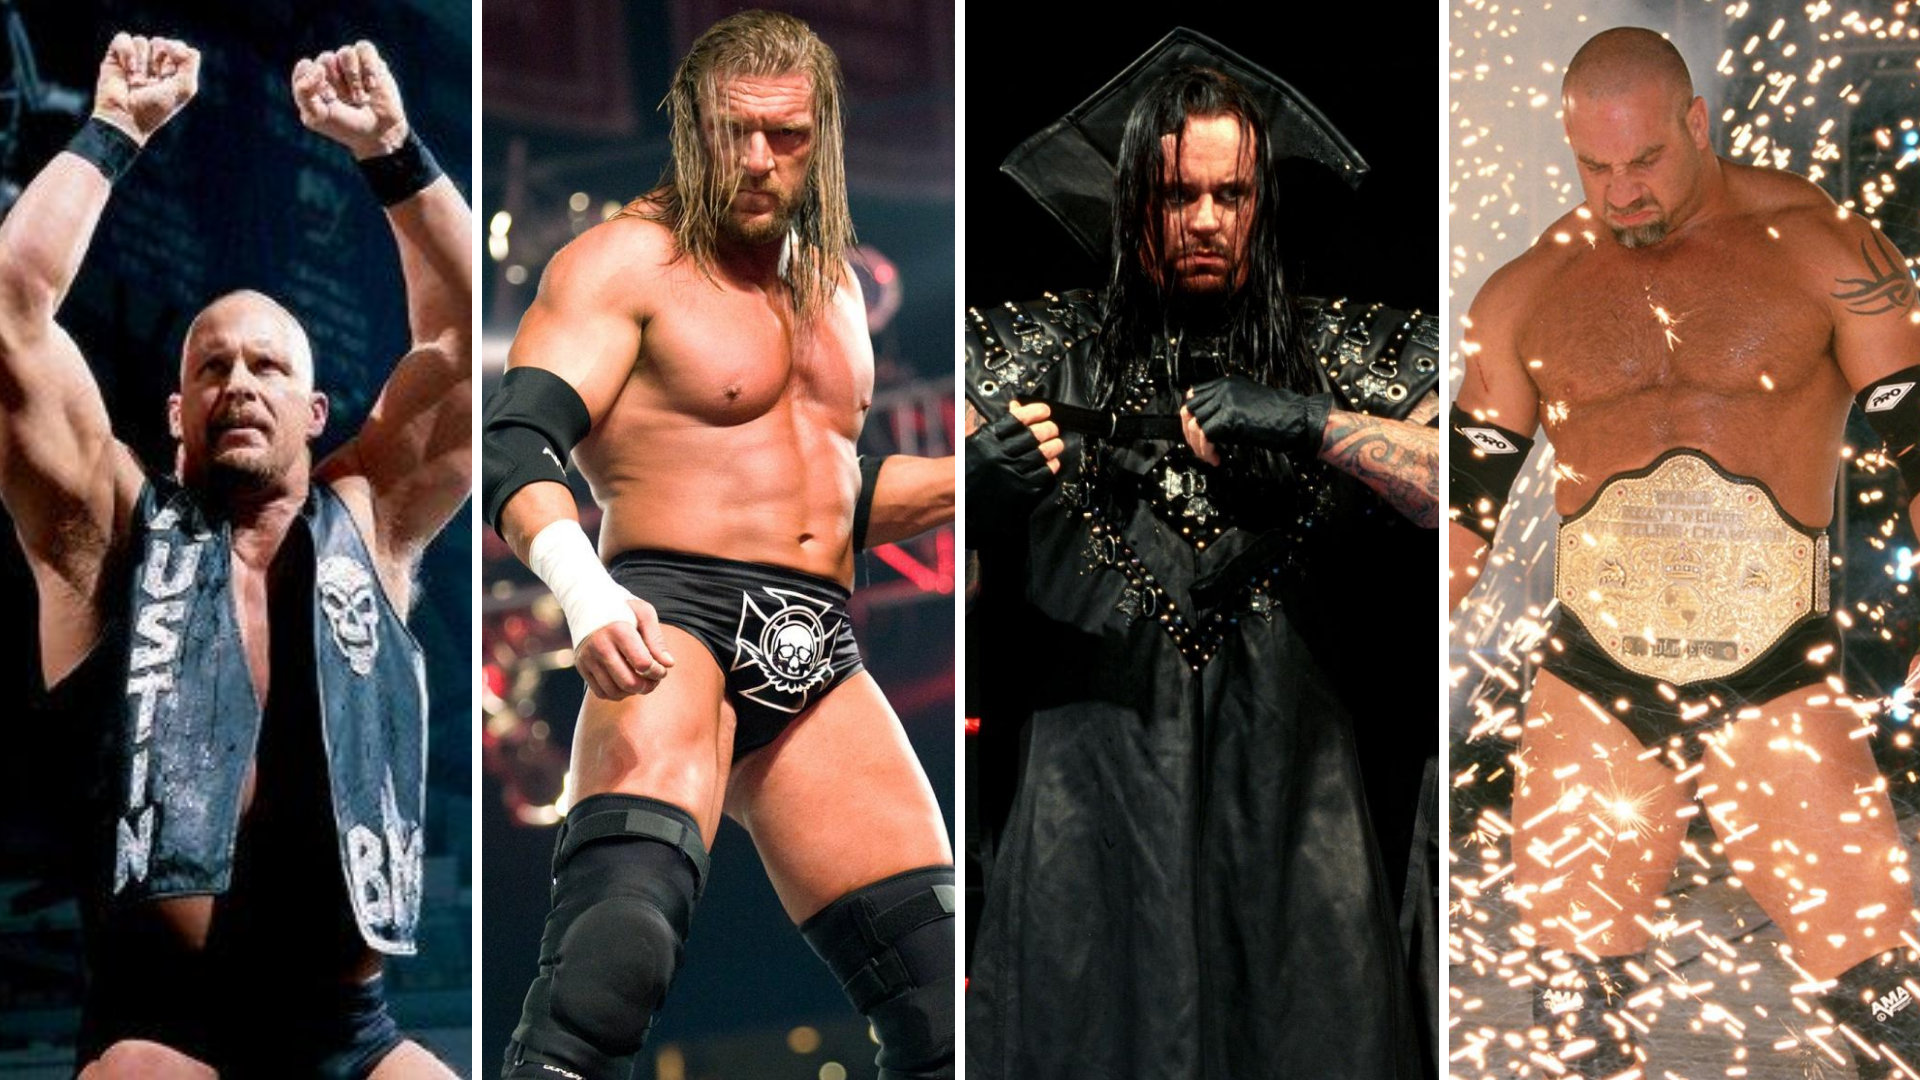 Legends of the Ring: Wrestling Stars of the 90s